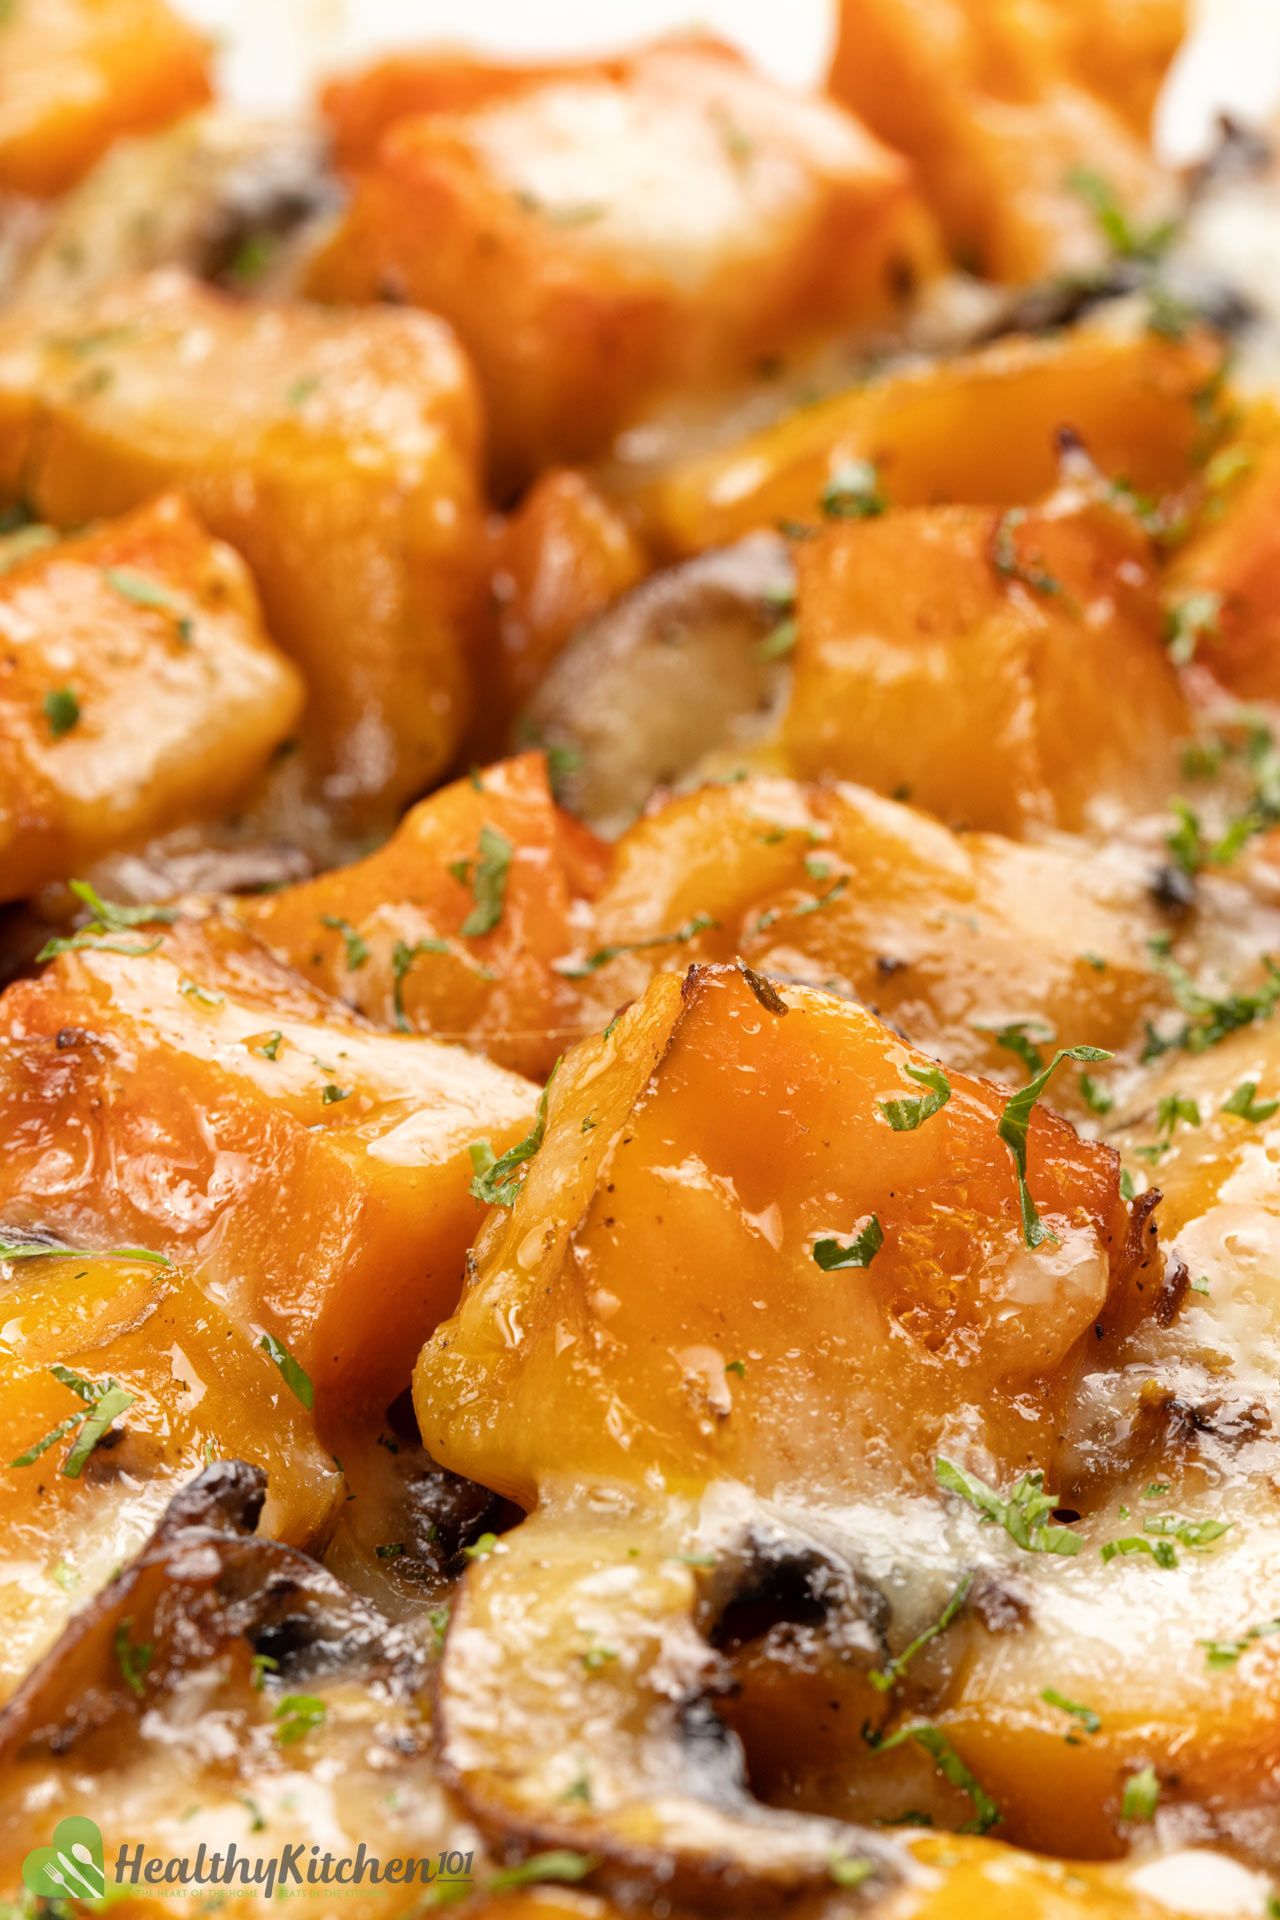 What Goes with Butternut Squash Casserole?